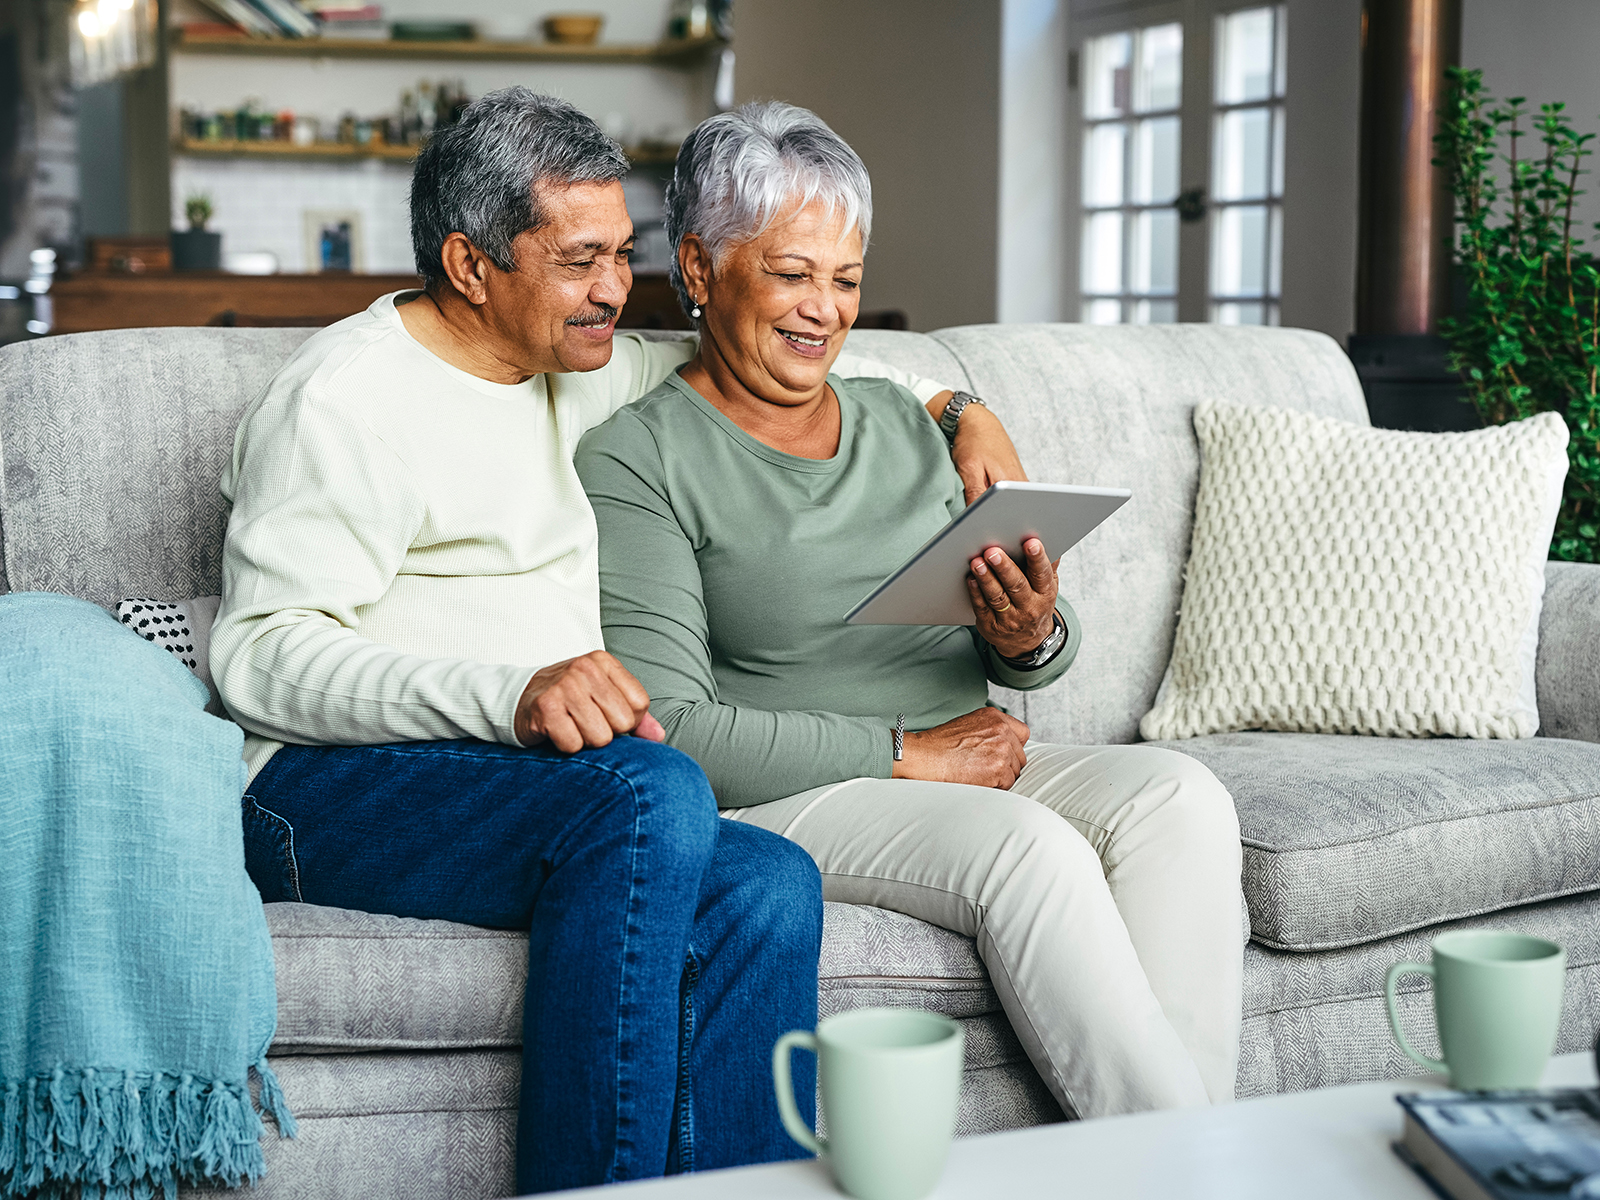 Senior couple sitting on a couch smiling while looking at tablet.